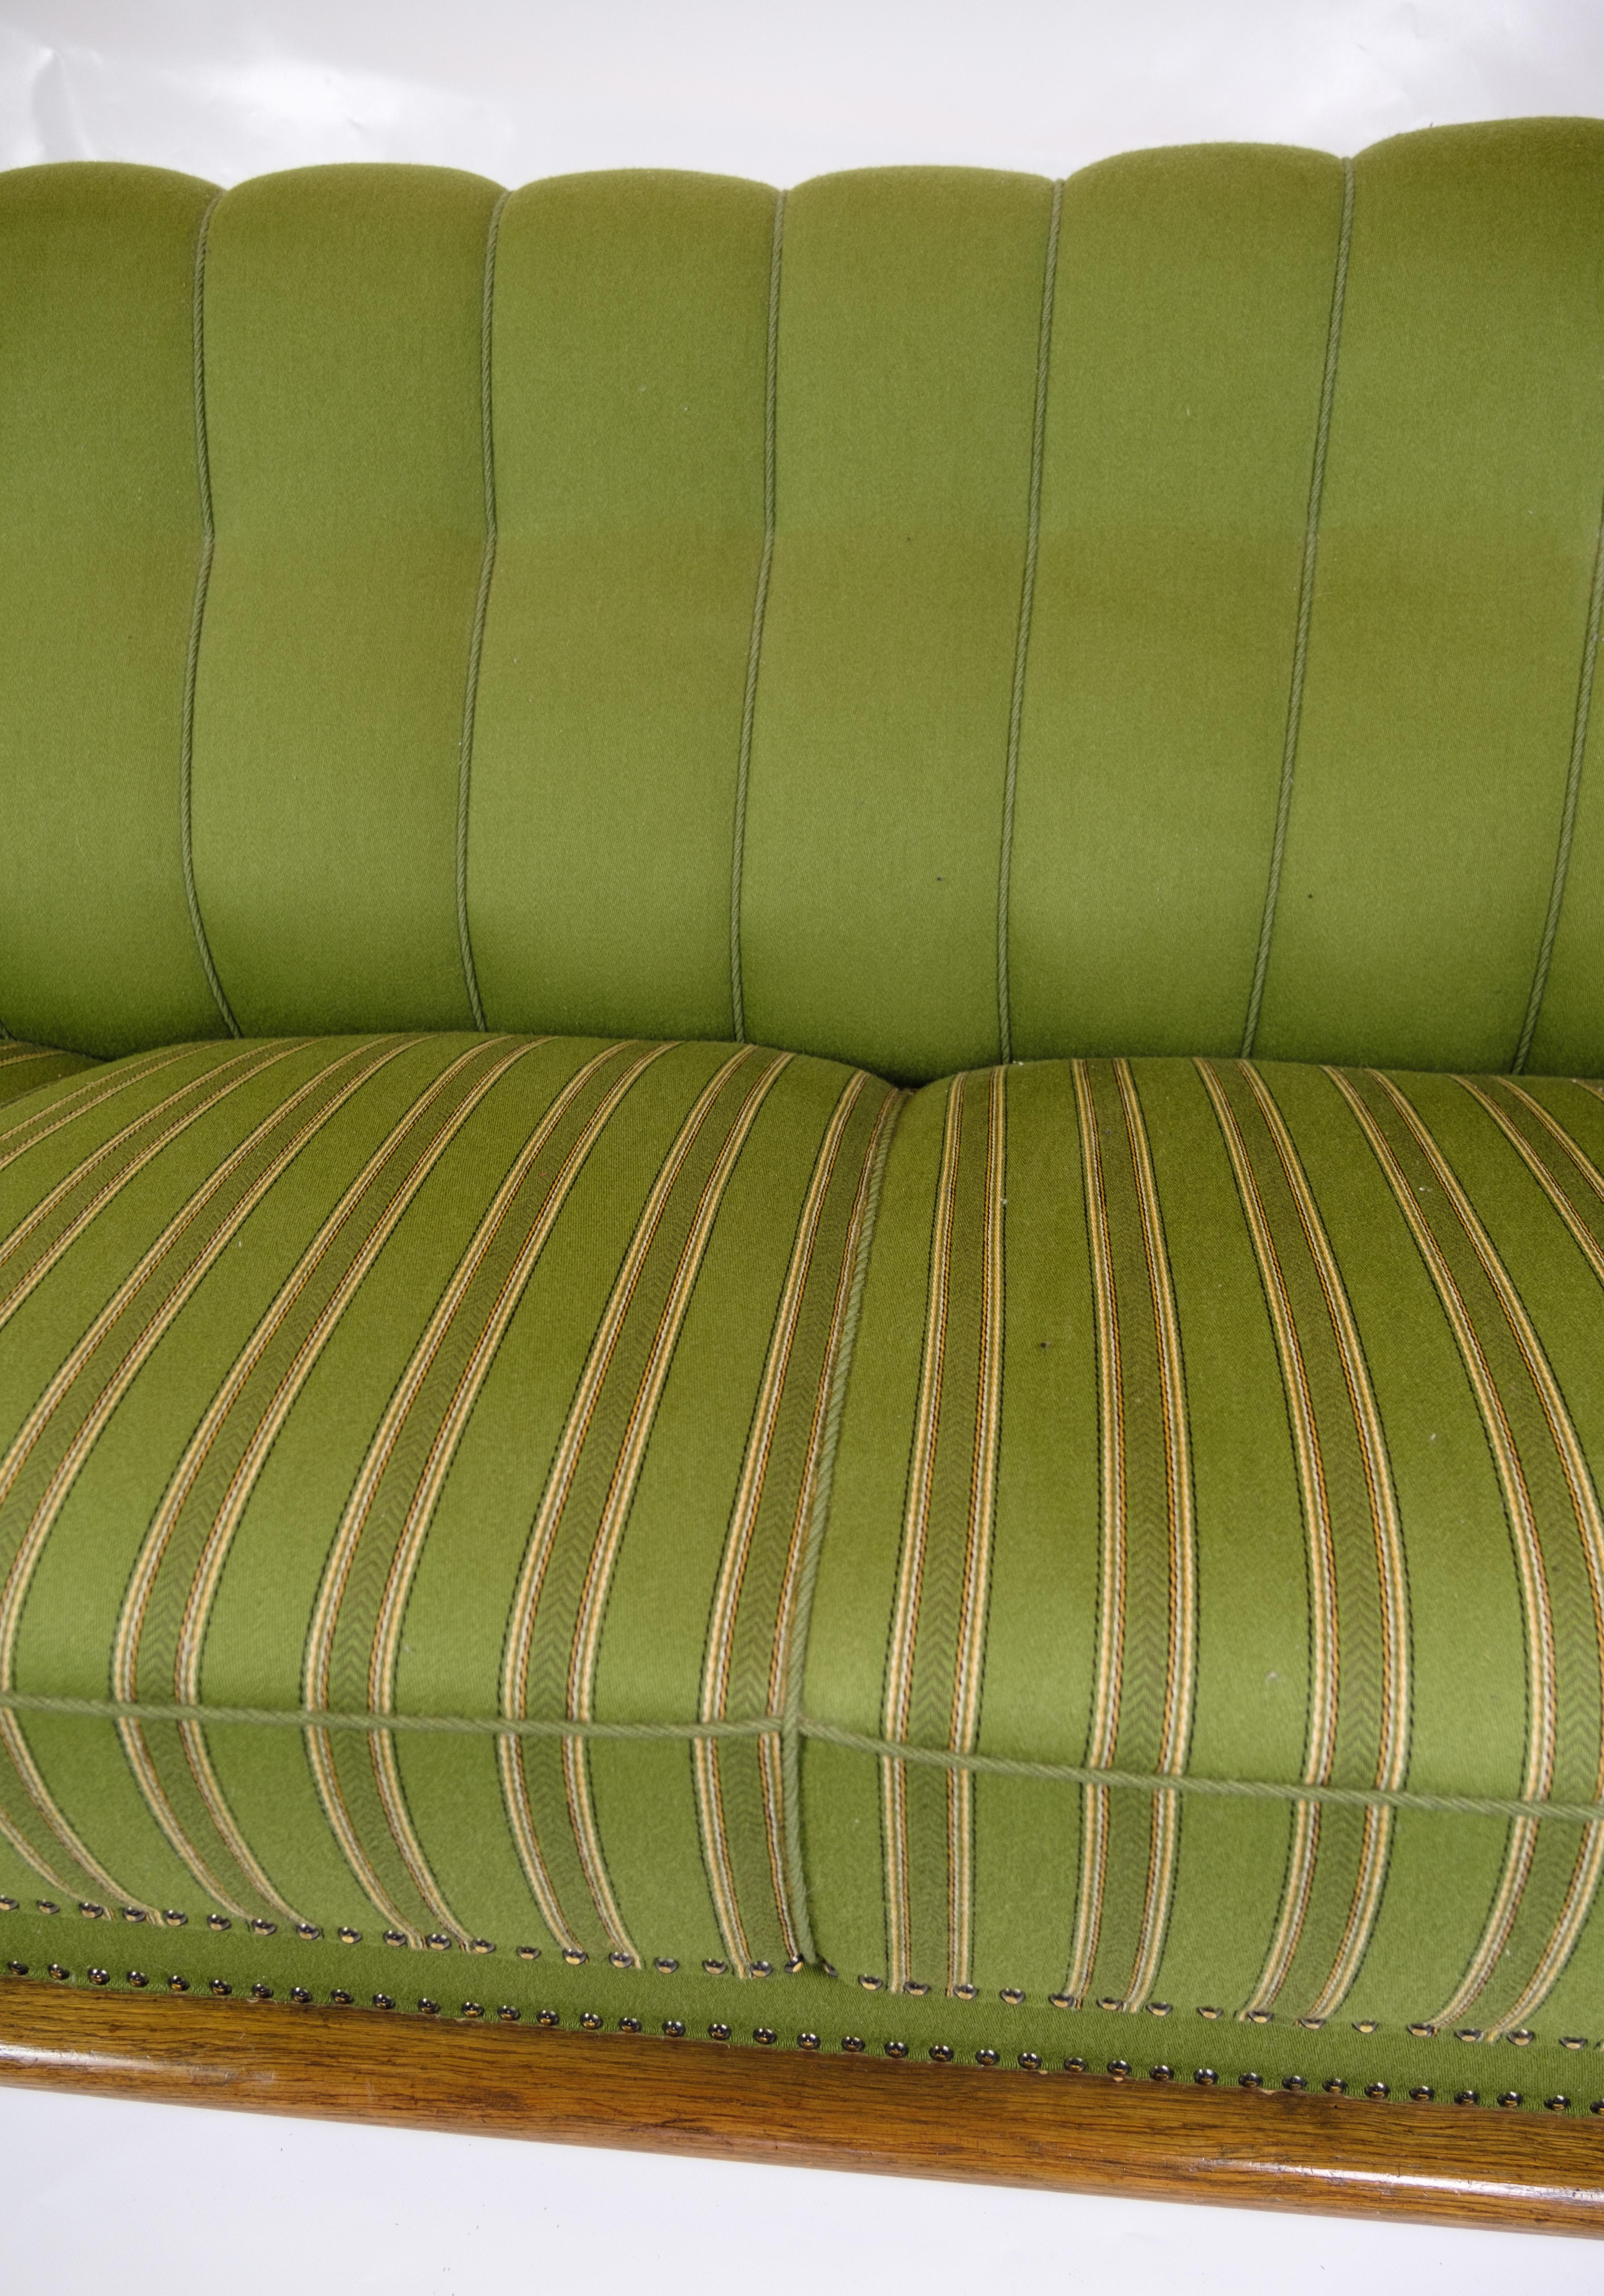 Fabric Sofa in Green fabric with Wood Carvings from 1920s.